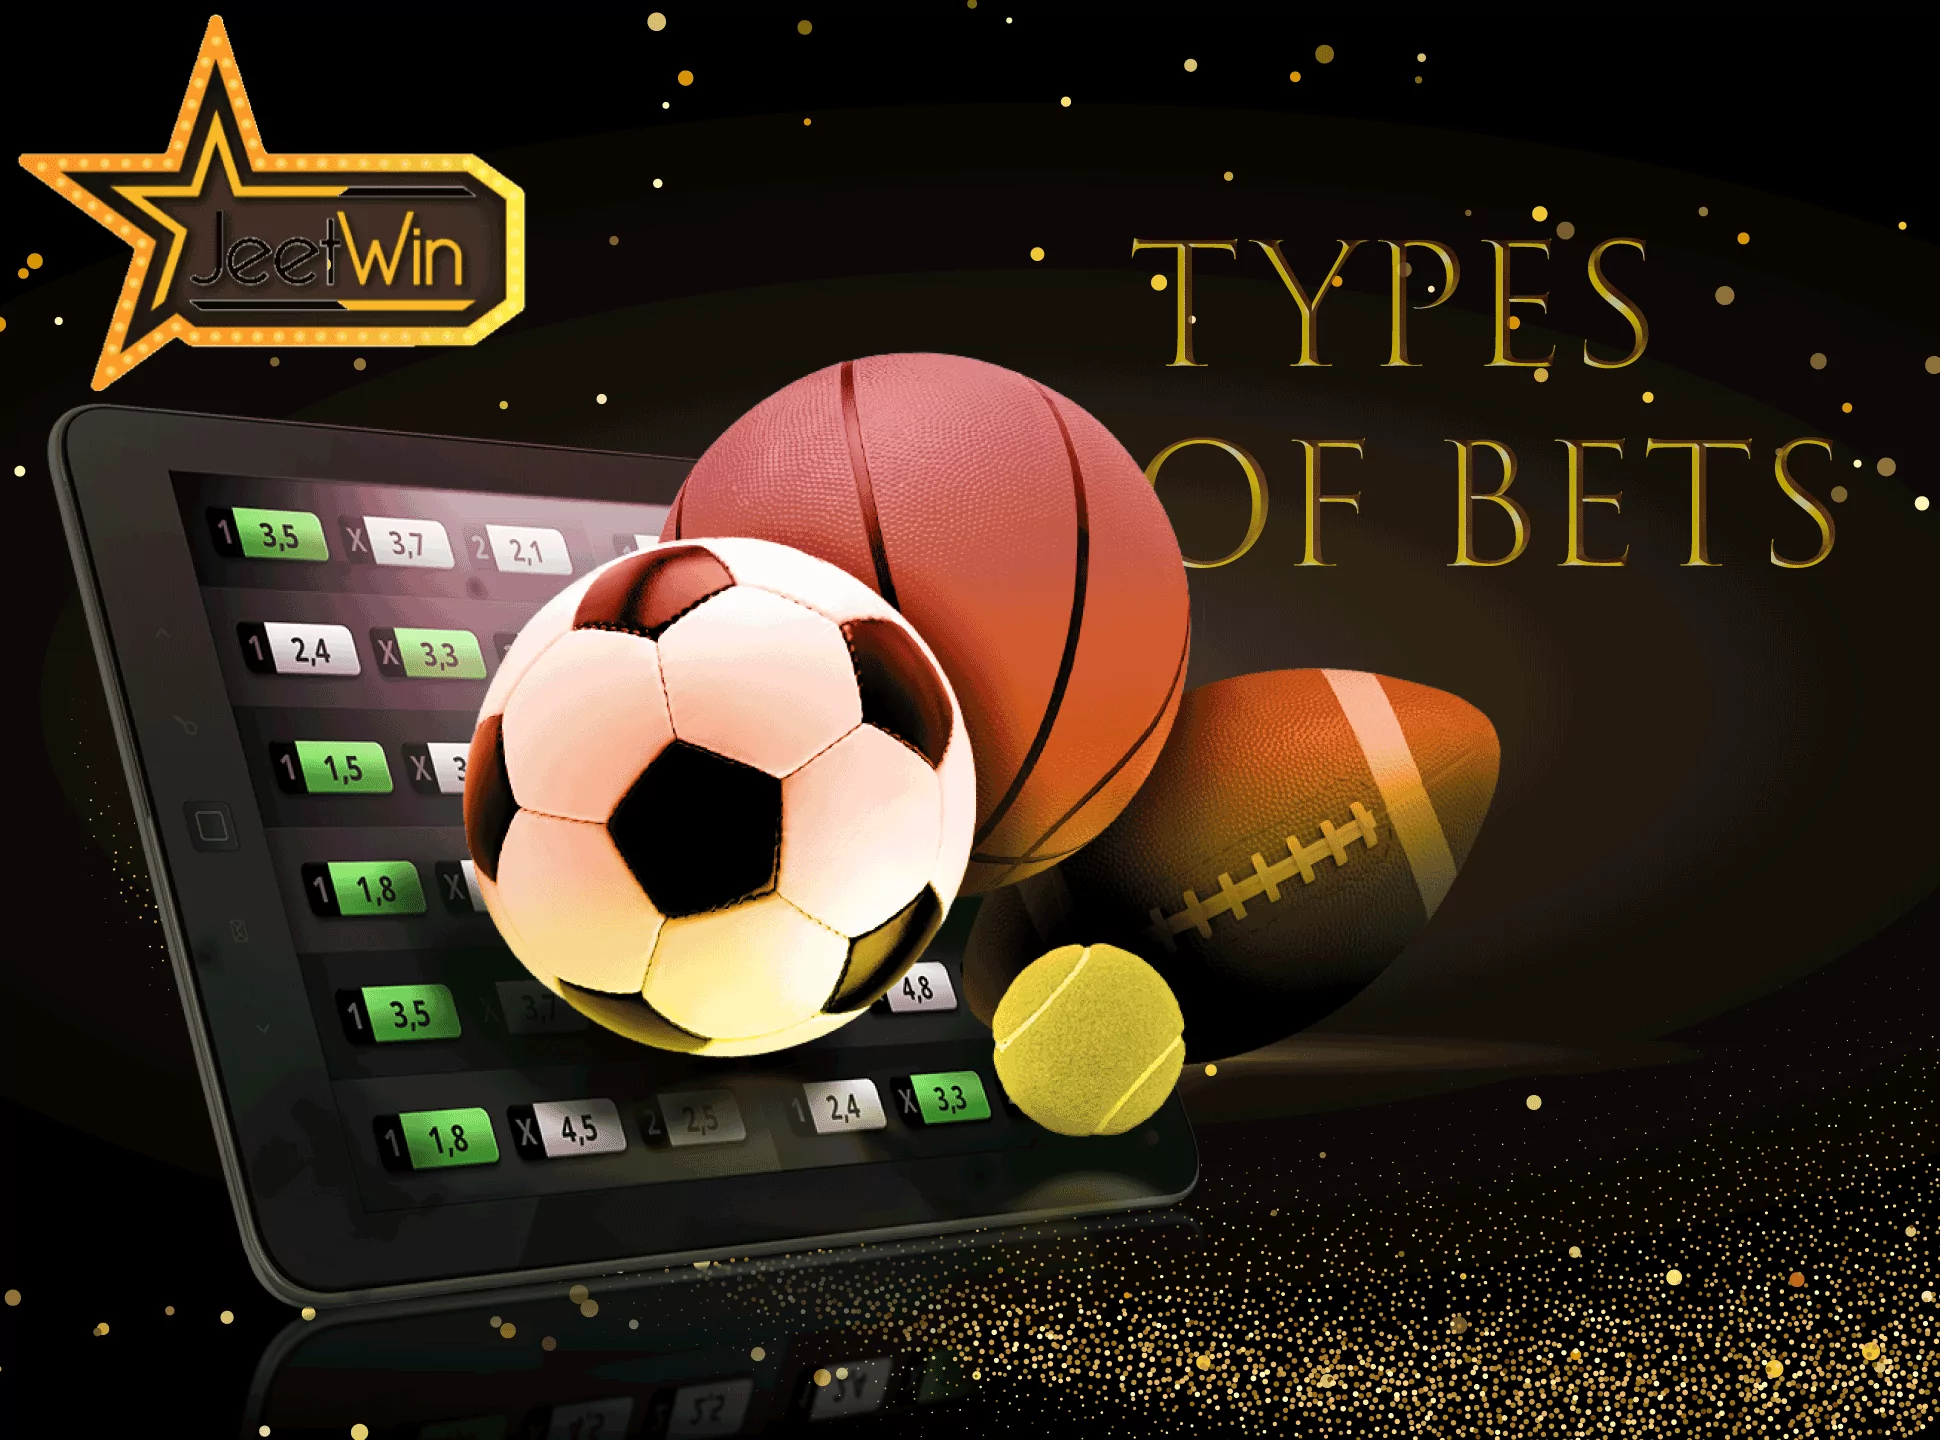 Place different types of bet in the Jeetwin mobile app.